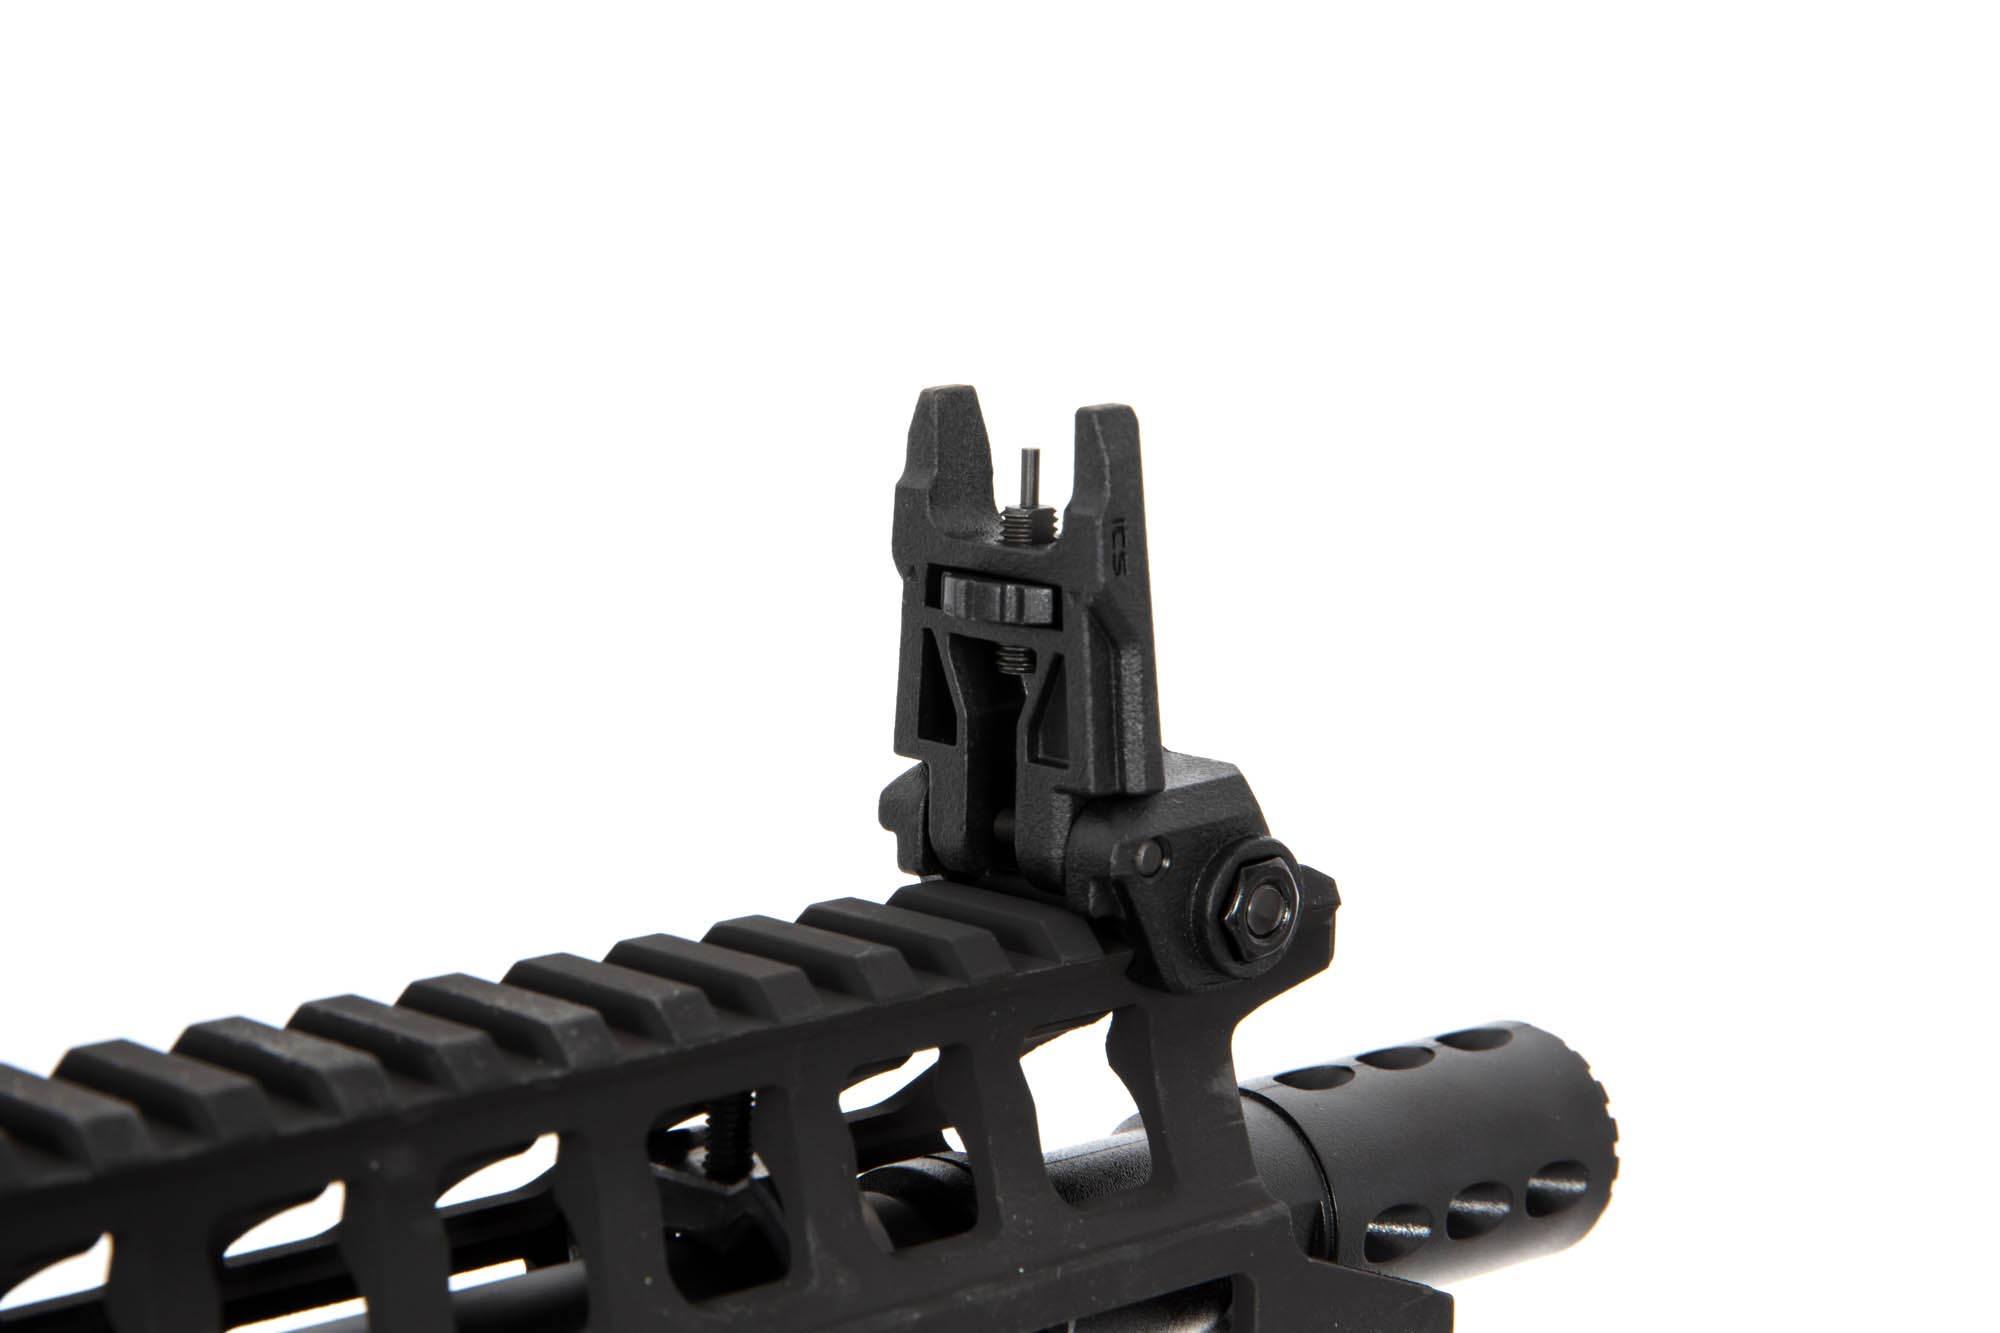 Lightway-Peleador C S3 2.0 MTR - black by ICS on Airsoft Mania Europe